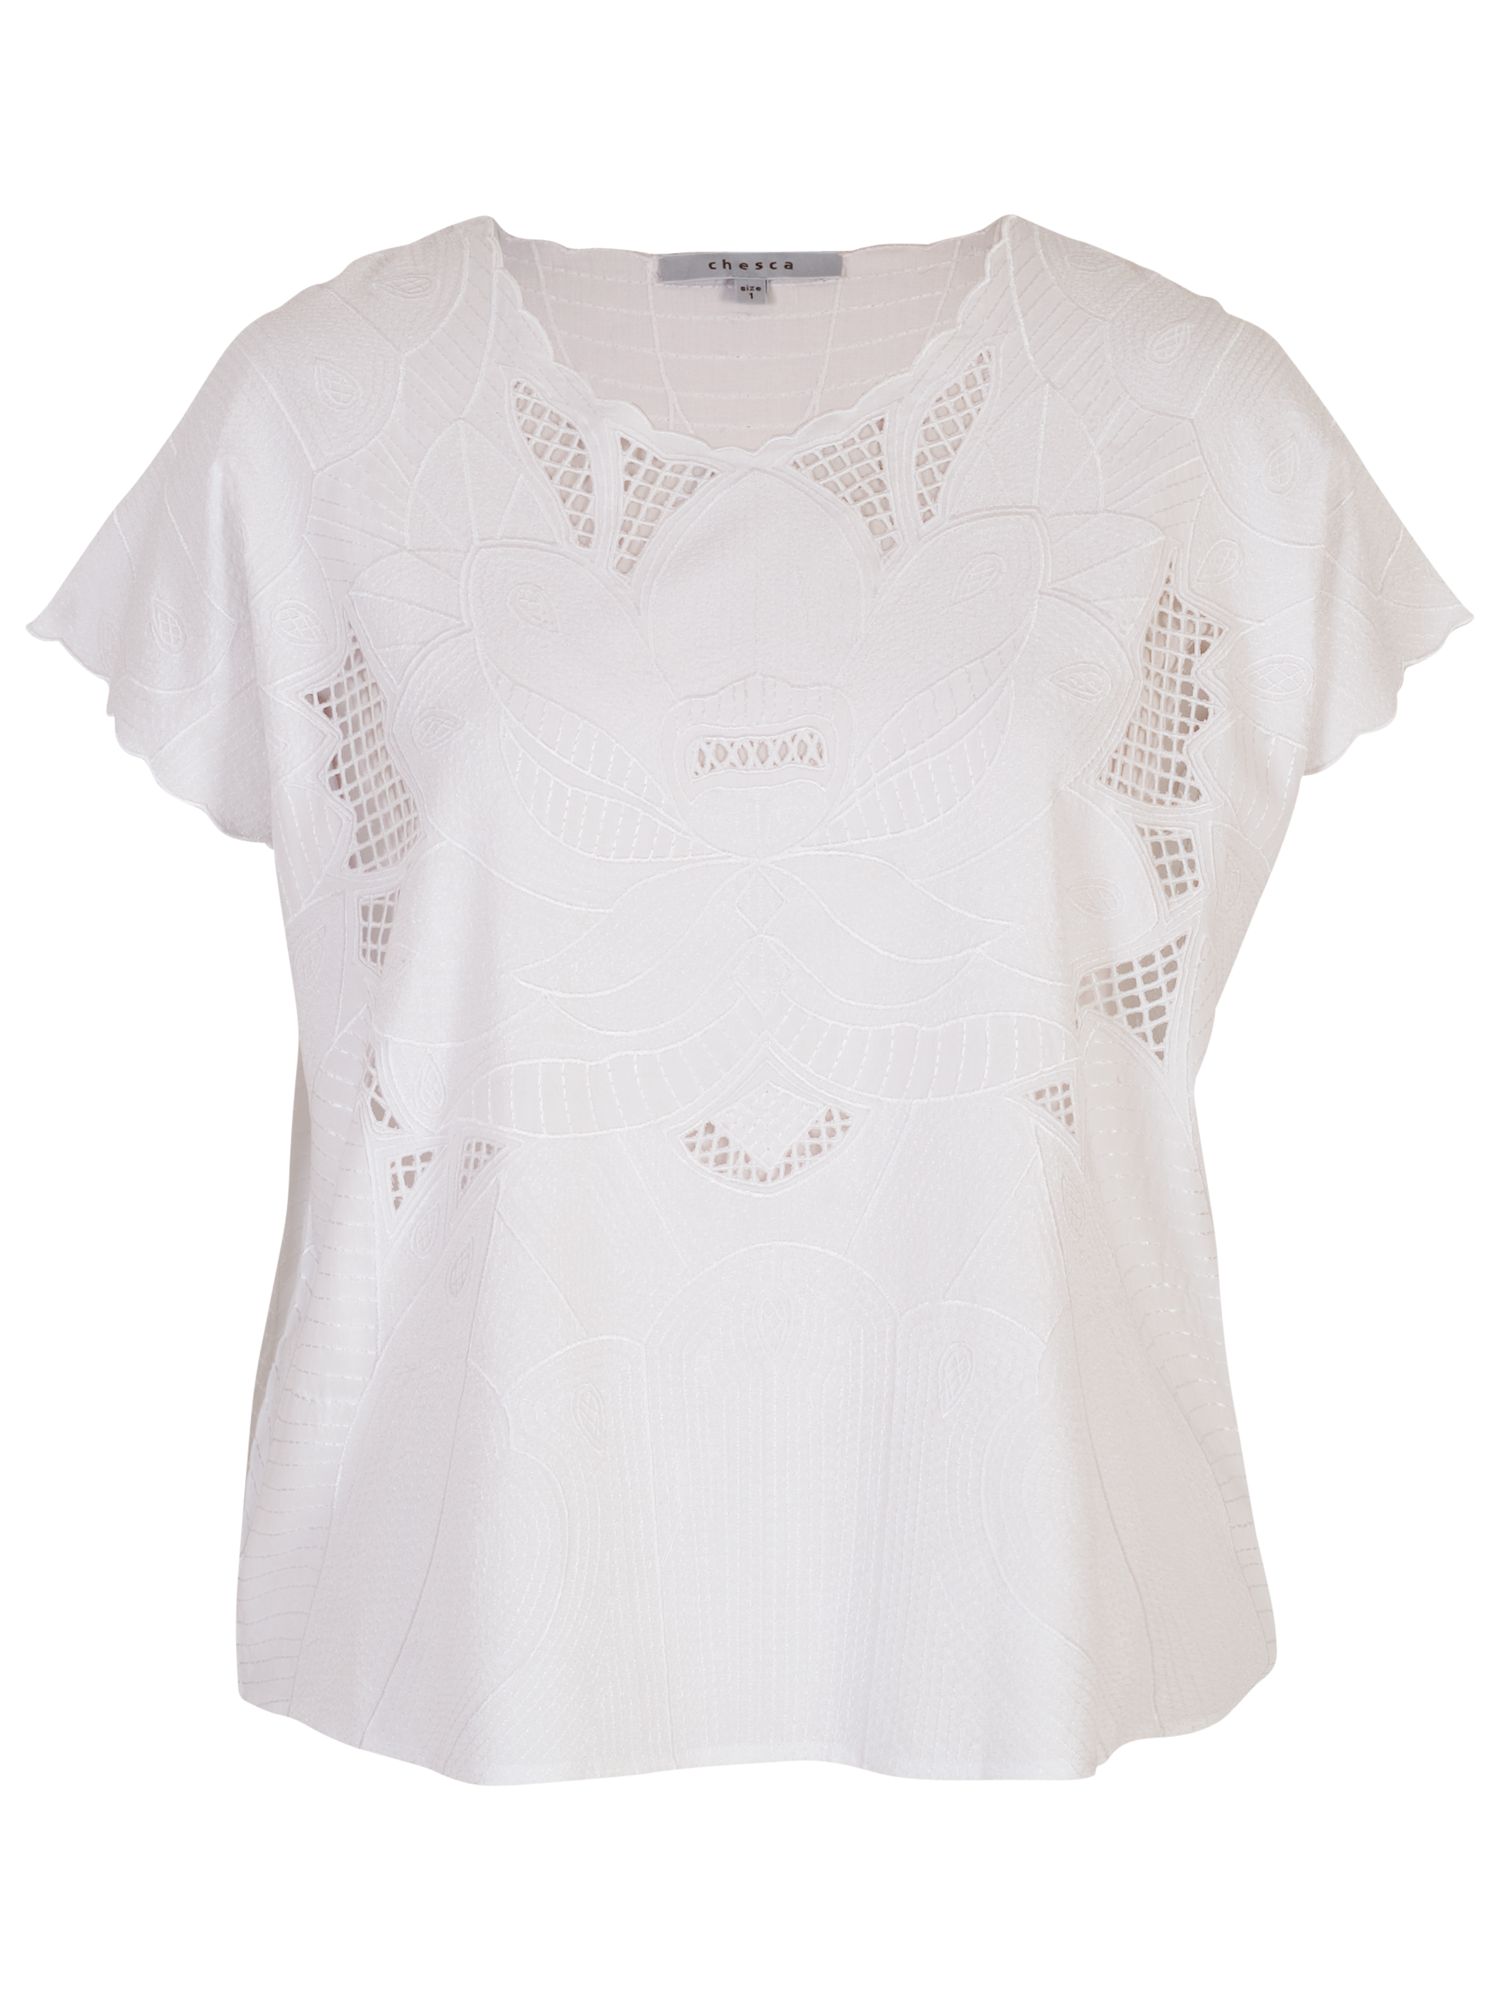 Chesca Embroidered Top, White